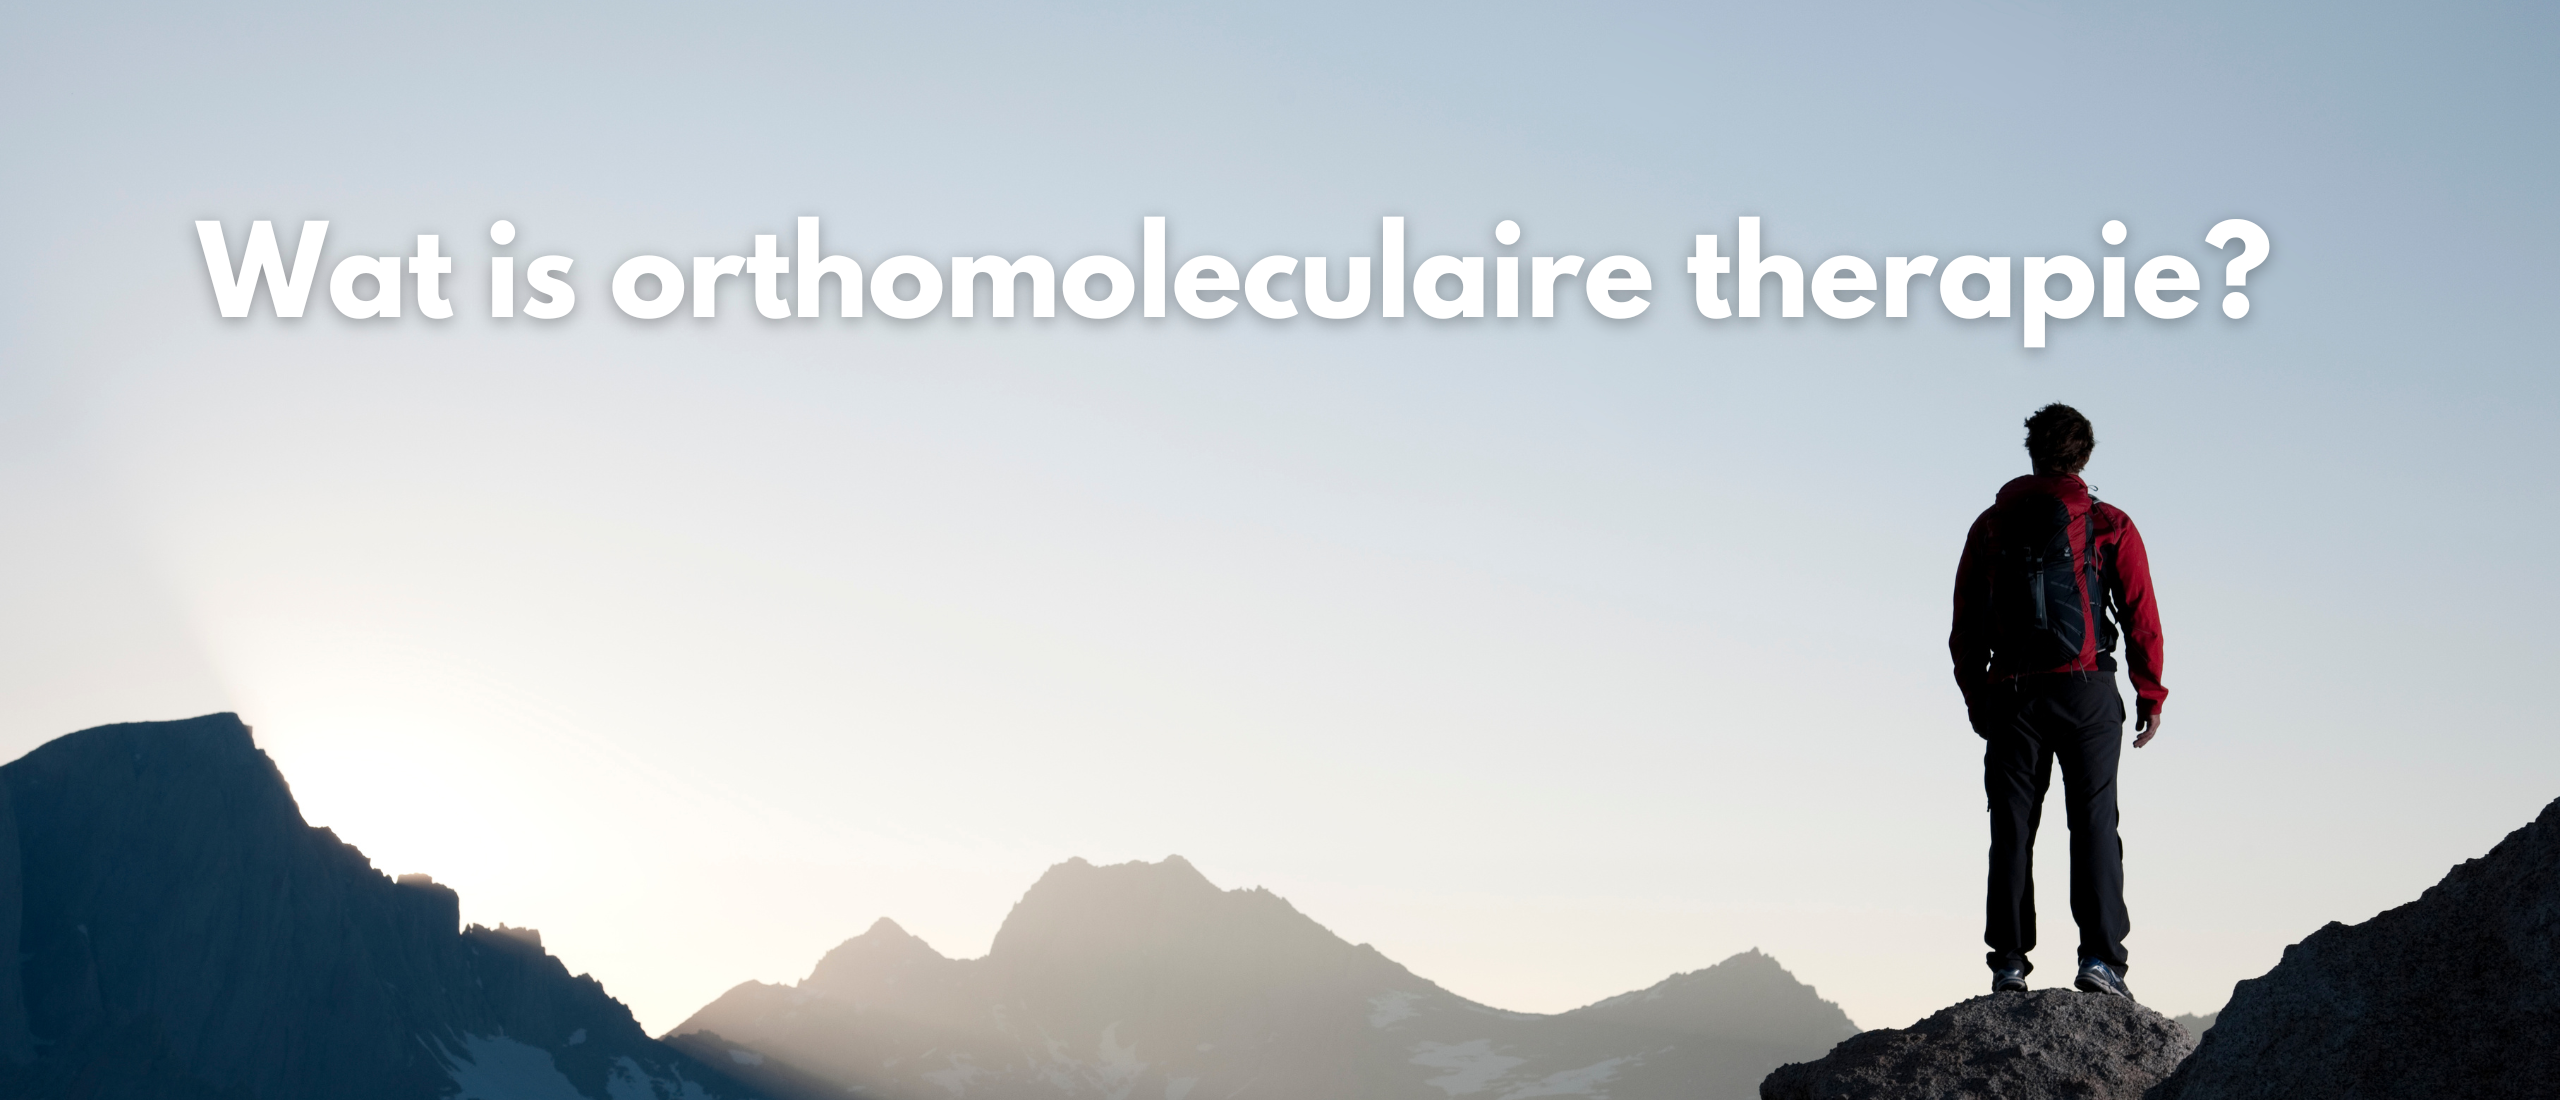 Wat is orthomoleculaire therapie?